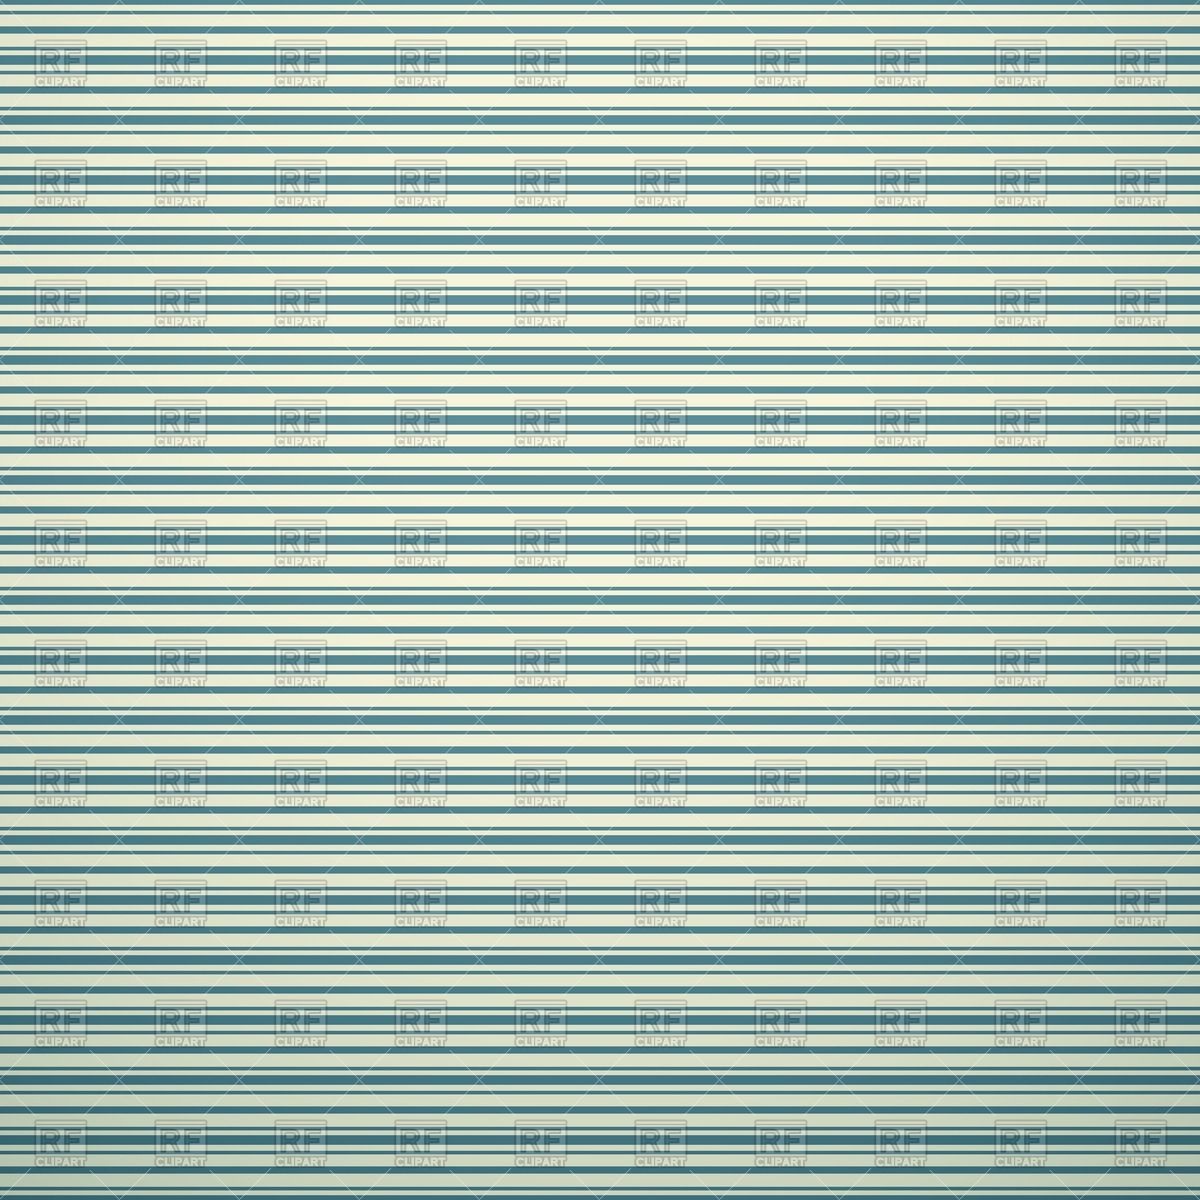 Vintage Striped Wallpaper Background Textures Abstract